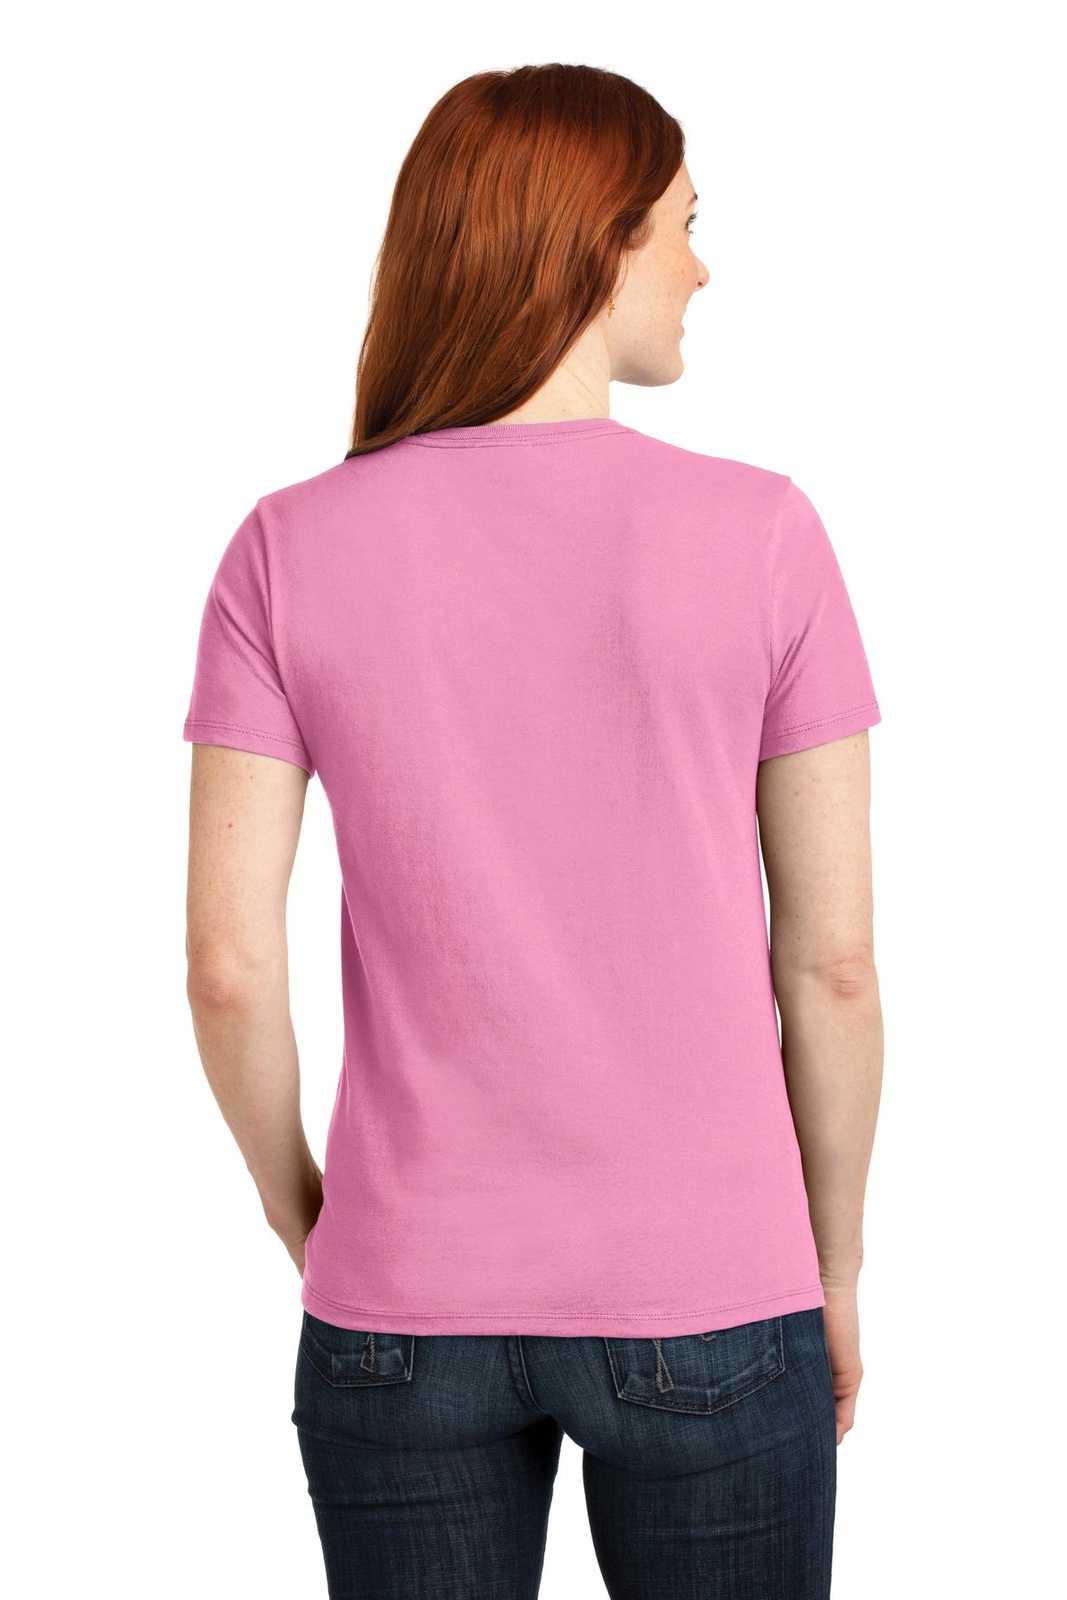 Port & Company LPC55 Ladies Core Blend Tee - Candy Pink - HIT a Double - 1